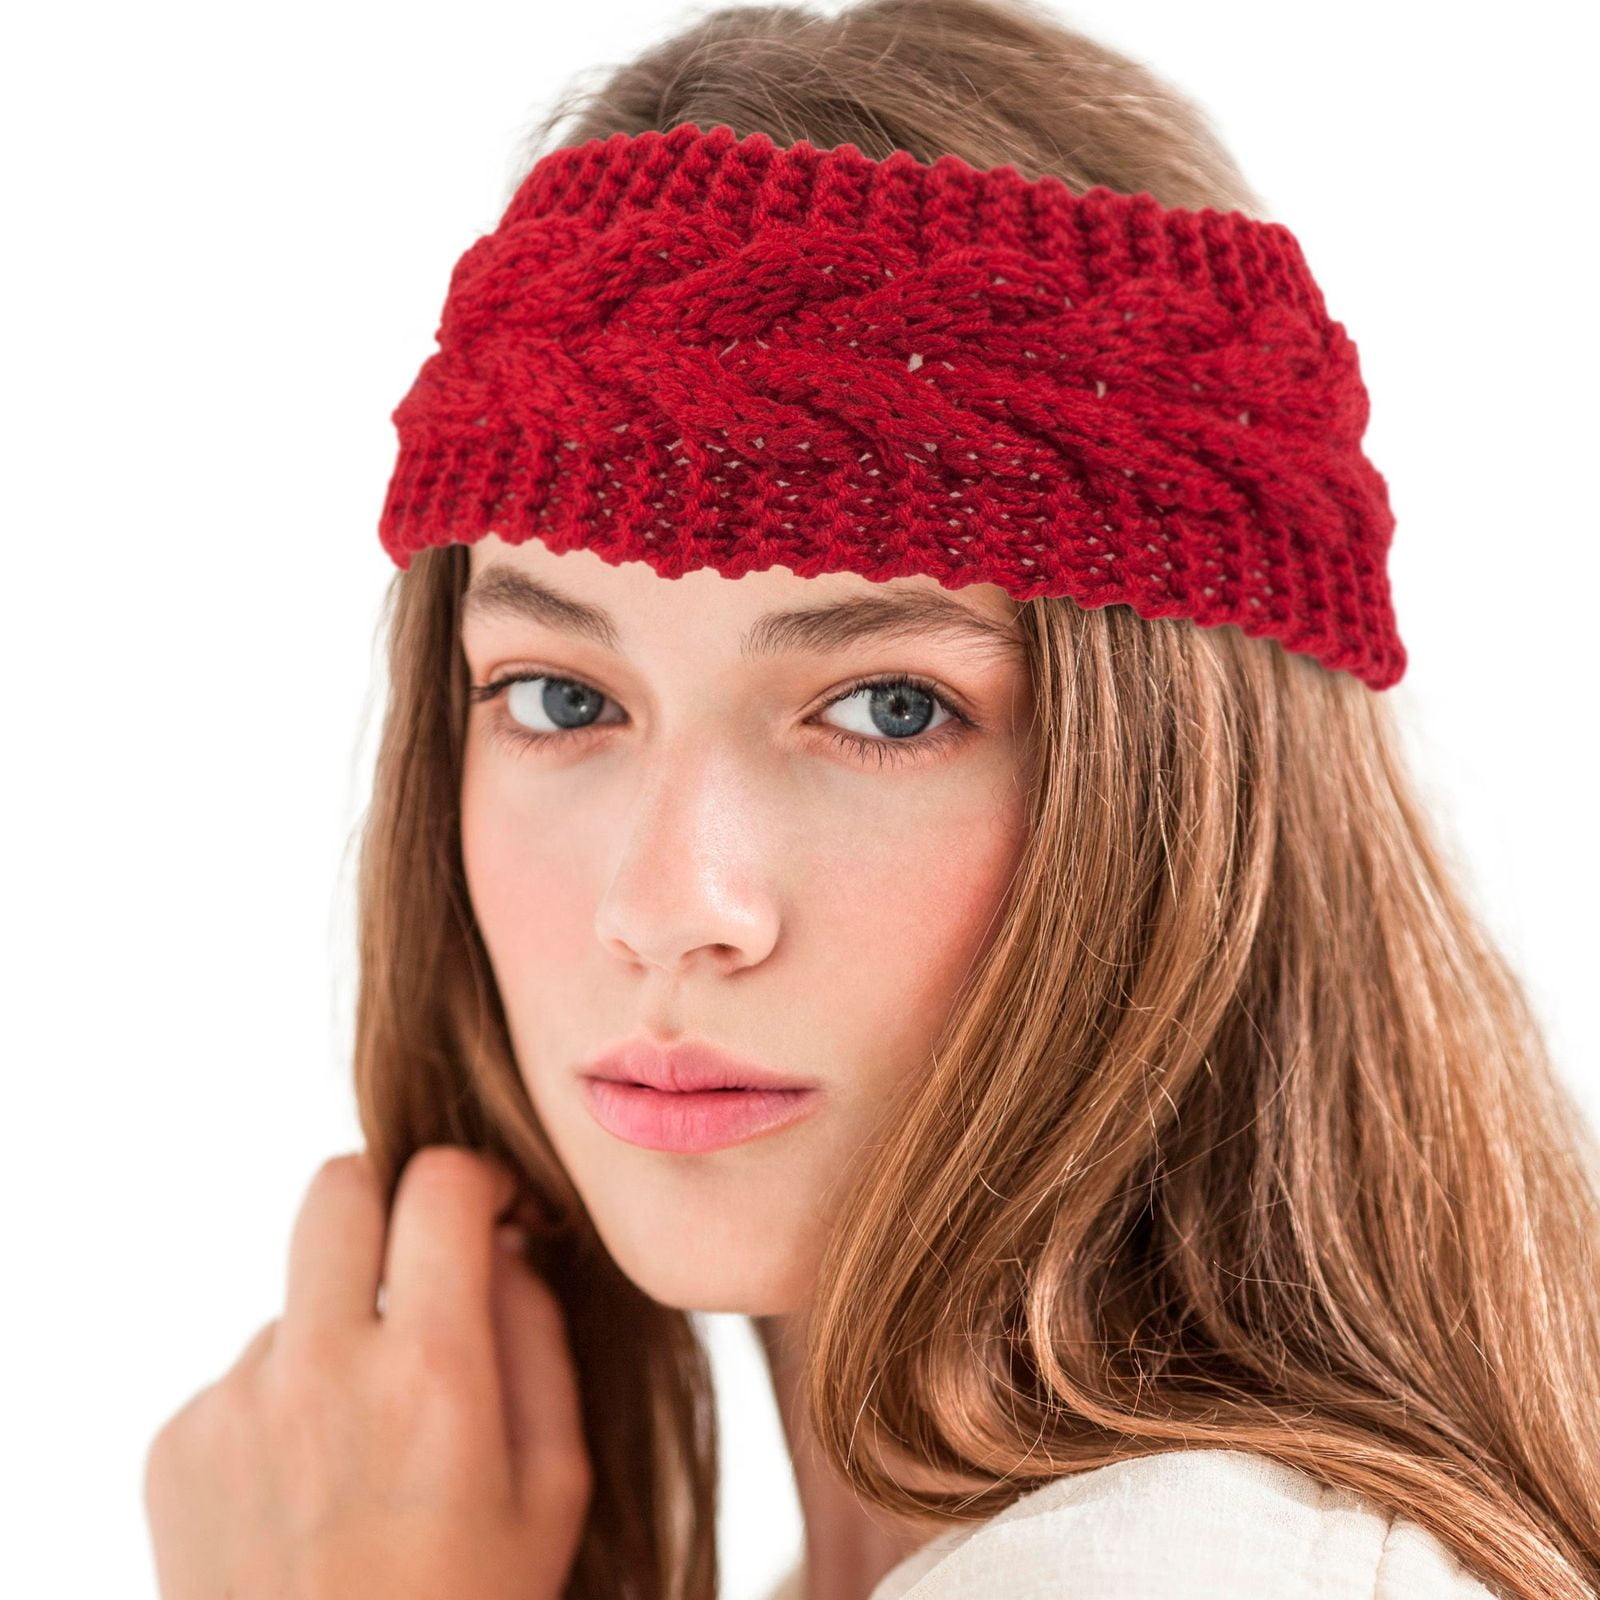 Knit Headband Wrap Ear Warmer Wide Thick Fashion Hair Accessory Brown Red 